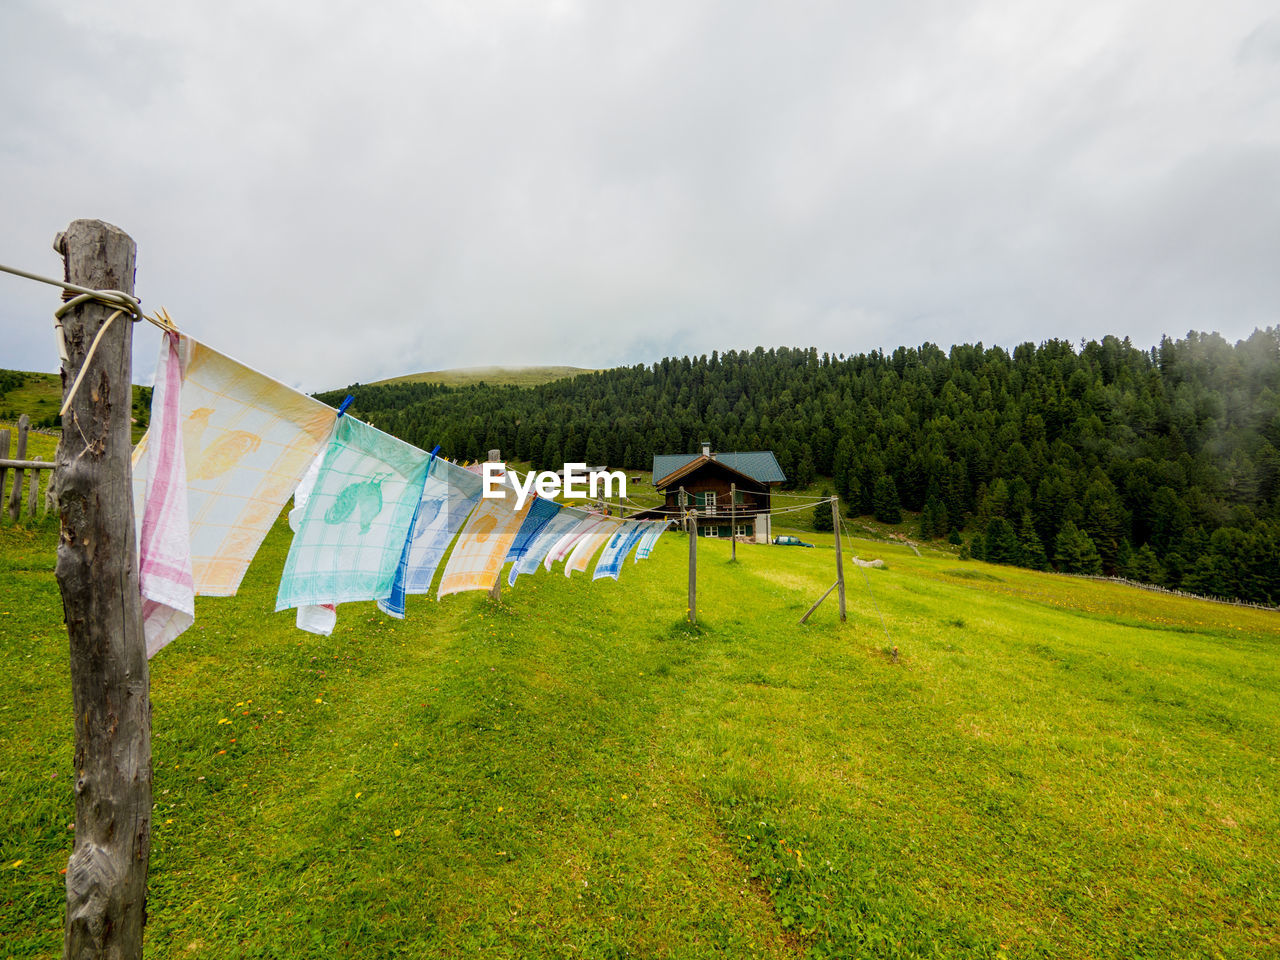 sky, plant, grass, environment, nature, rural area, cloud, meadow, landscape, land, no people, green, clothesline, laundry, field, tranquility, hanging, multi colored, drying, tree, scenics - nature, day, beauty in nature, rural scene, clothing, wind, outdoors, plain, textile, mountain, tranquil scene, travel, flag, non-urban scene, overcast, travel destinations, agriculture